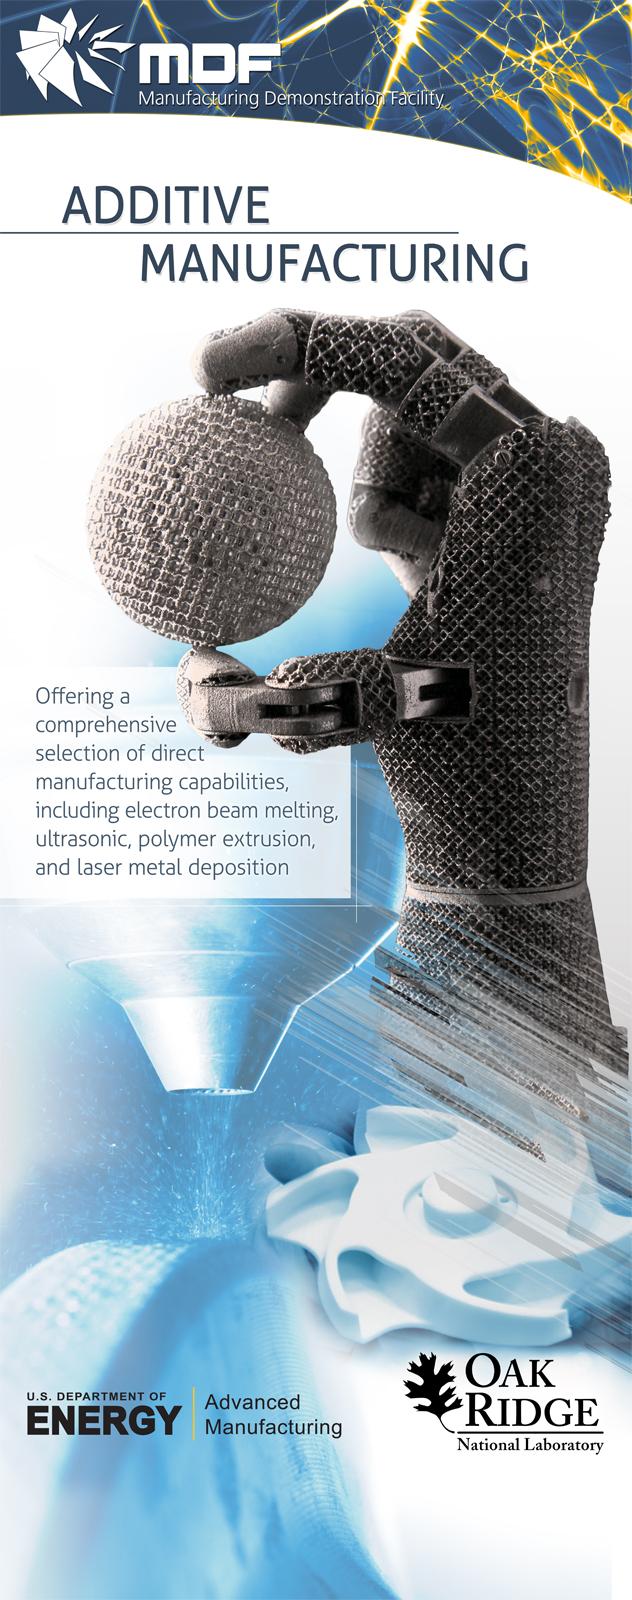 Additive Manufacturing R&D Developing advanced materials Titanium alloys, Ni superalloys, stainless and ultra highstrength steels High-strength, carbon-reinforced polymers Implementing advanced